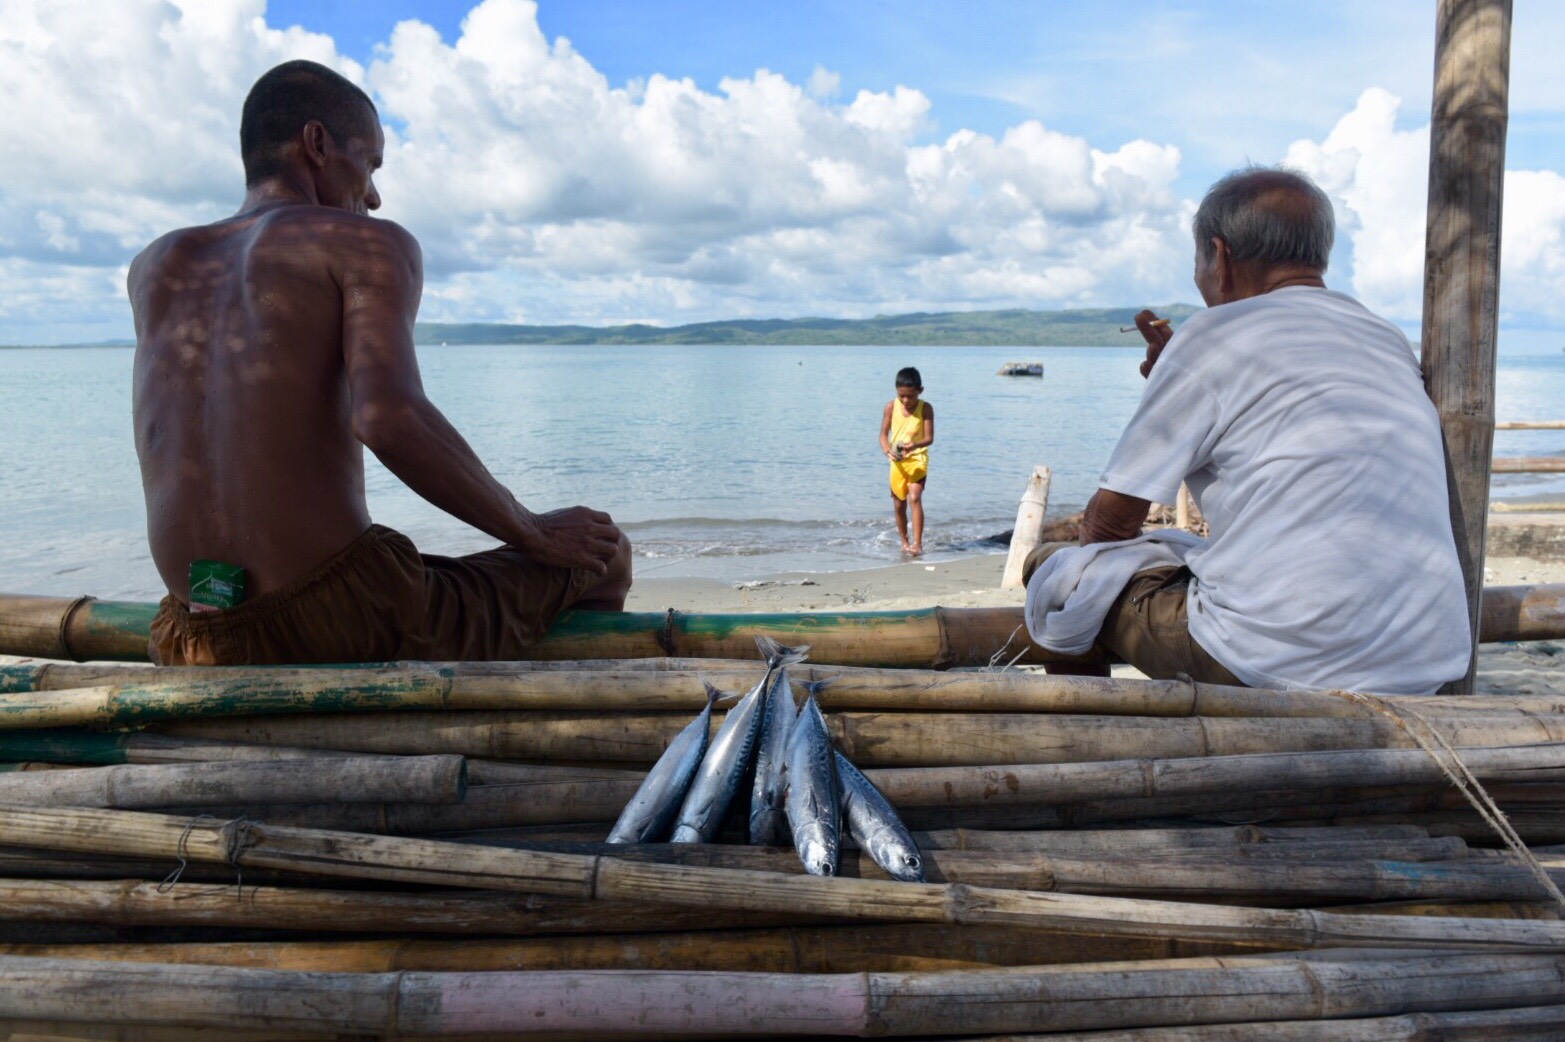 FISHERS OF SAN JOSE. The fishing community of Barangay Caminawit, San Jose, Mindoro Occidental on June 14, 2019, the home of the 22 Filipino fishermen abandoned after a Chinese vessel sank their boat. Photo by LeAnne Jazul/Rappler 